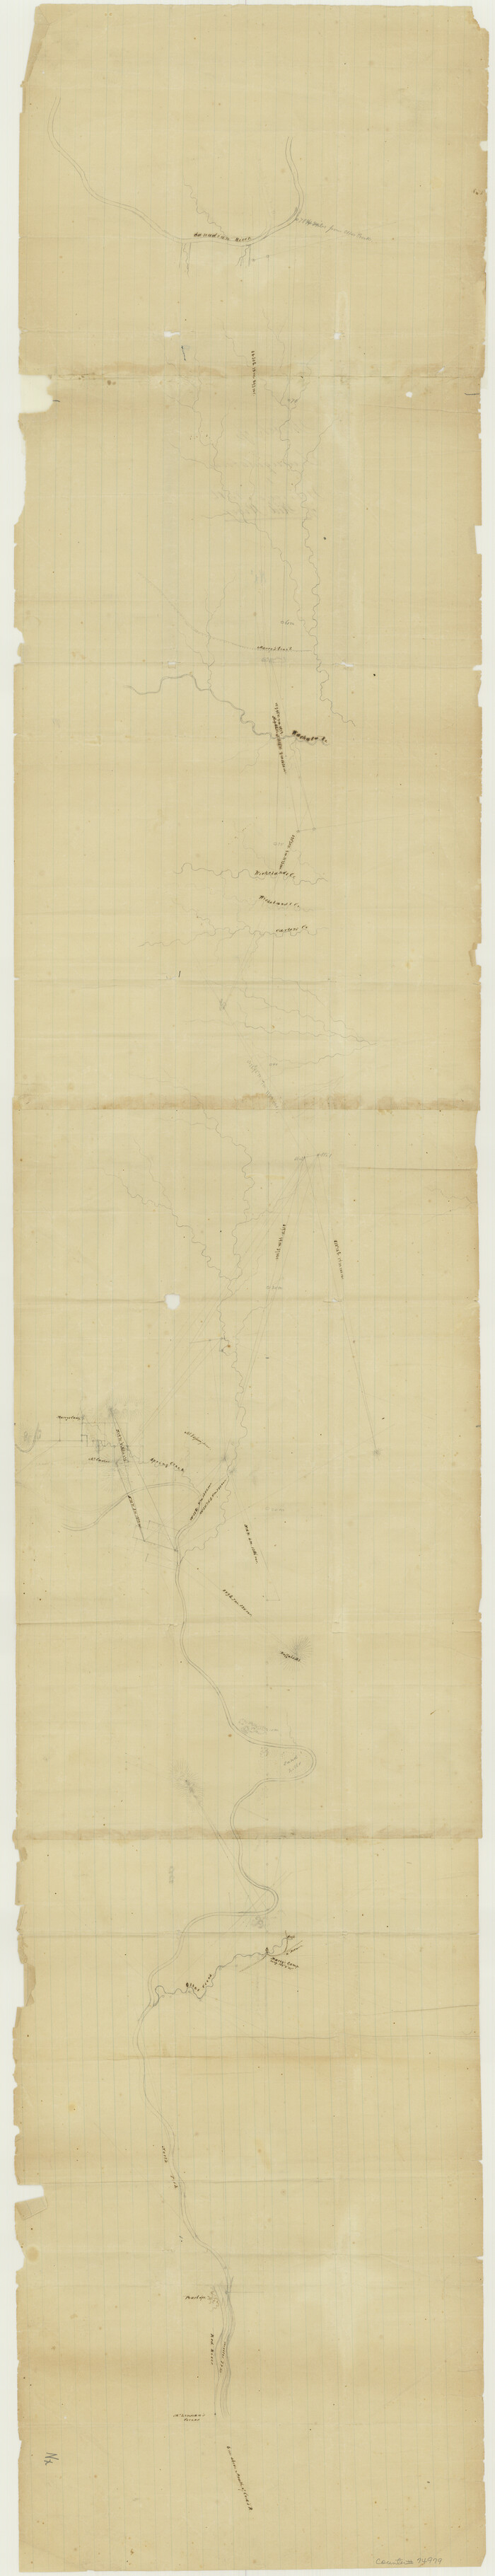 74979, Texas-United States Boundary Line 3, General Map Collection